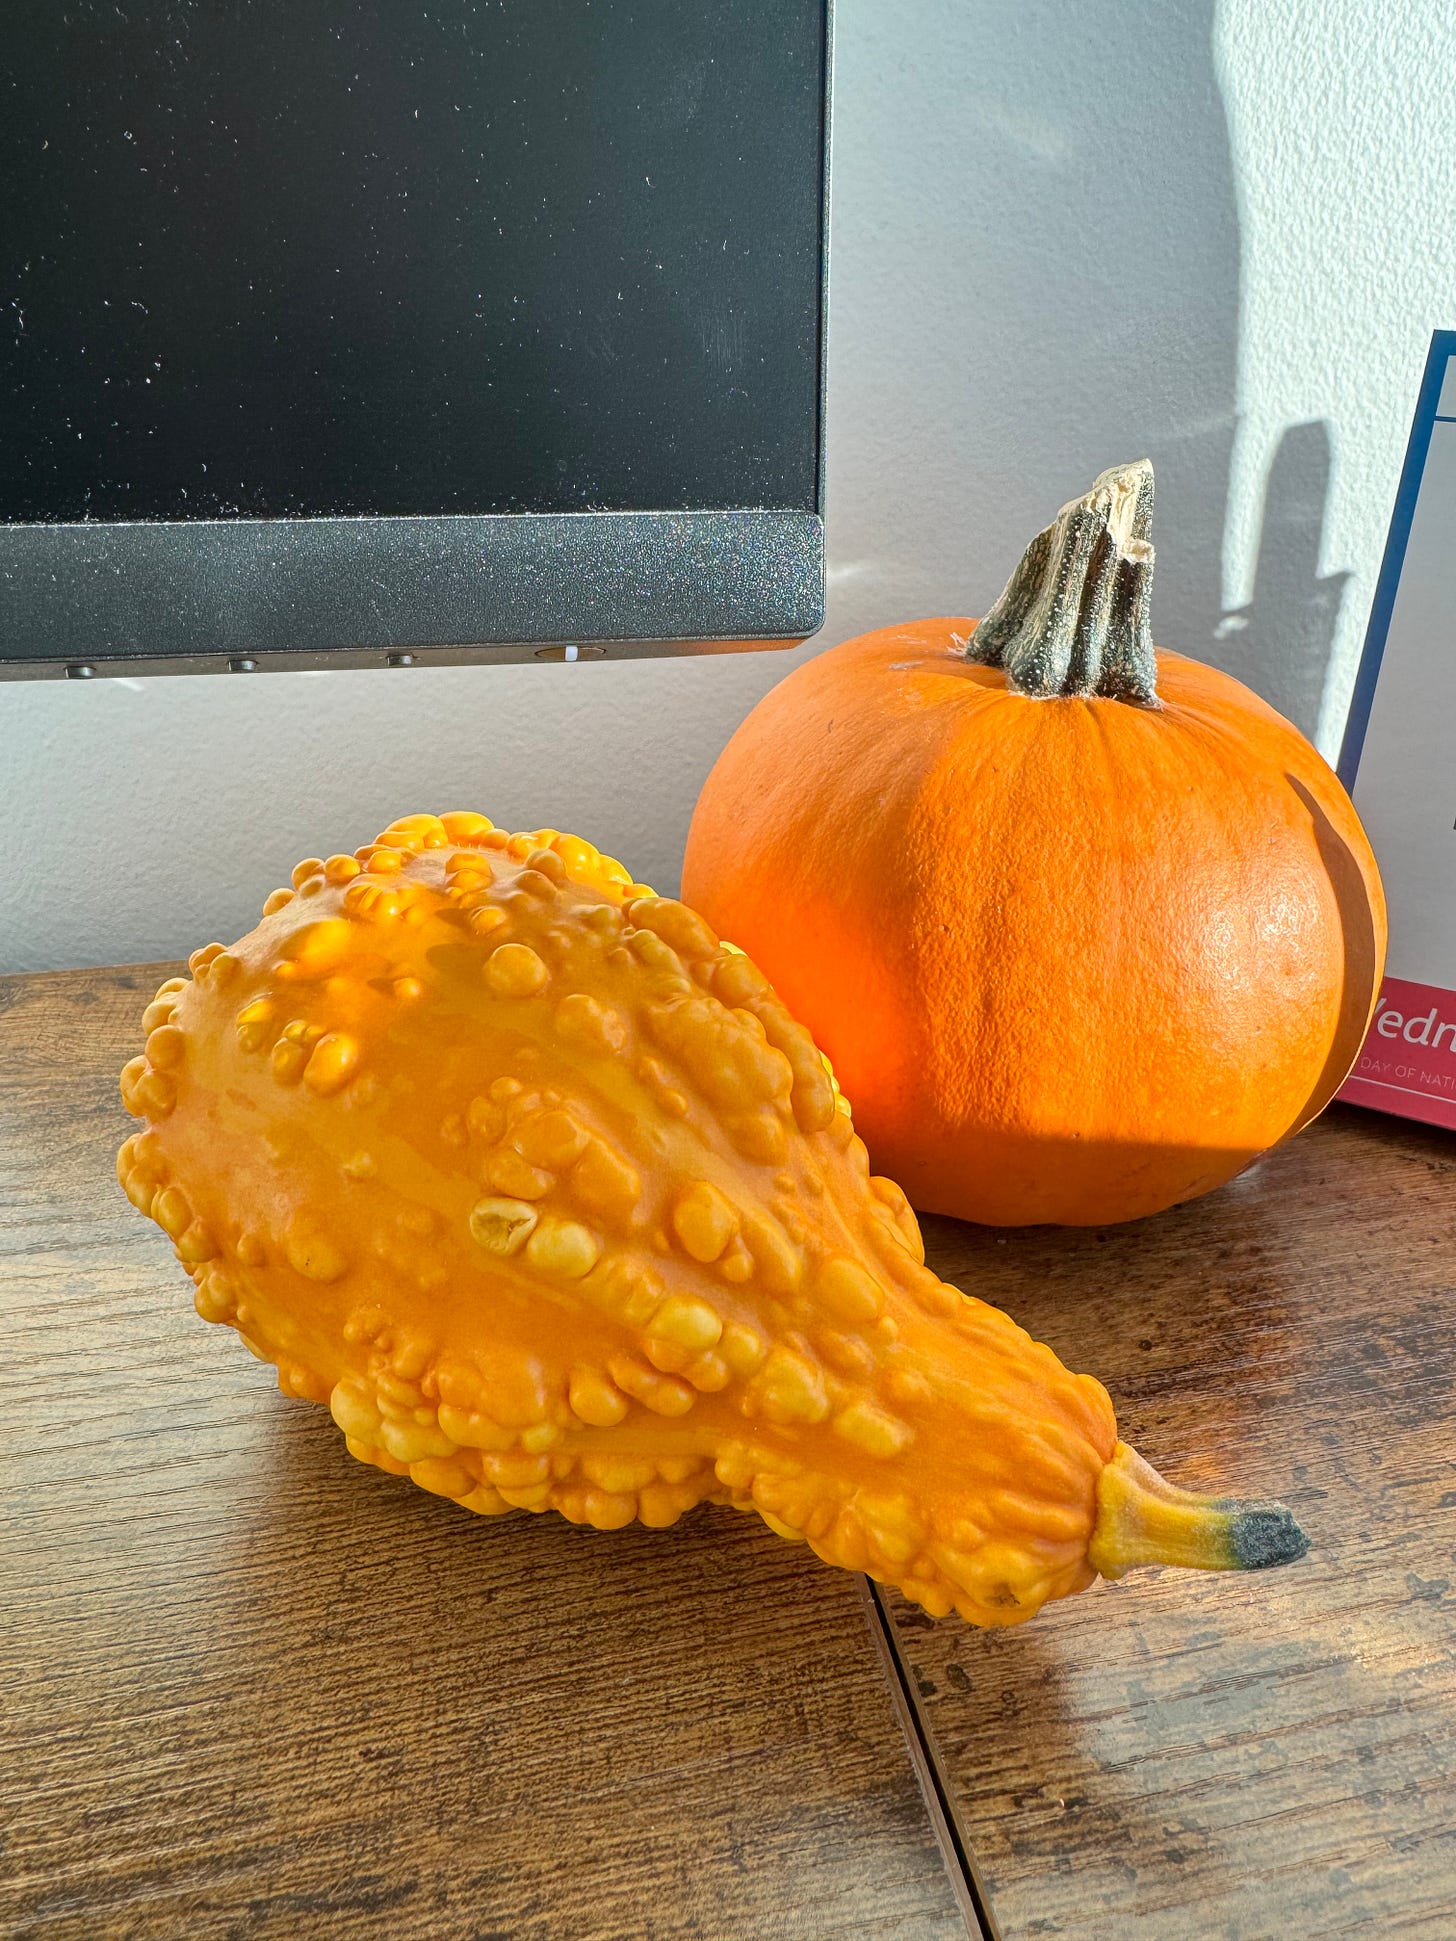 a photo of a small pumpkin and bumpy orange gourd on a wooden desk, bathed in sunlight